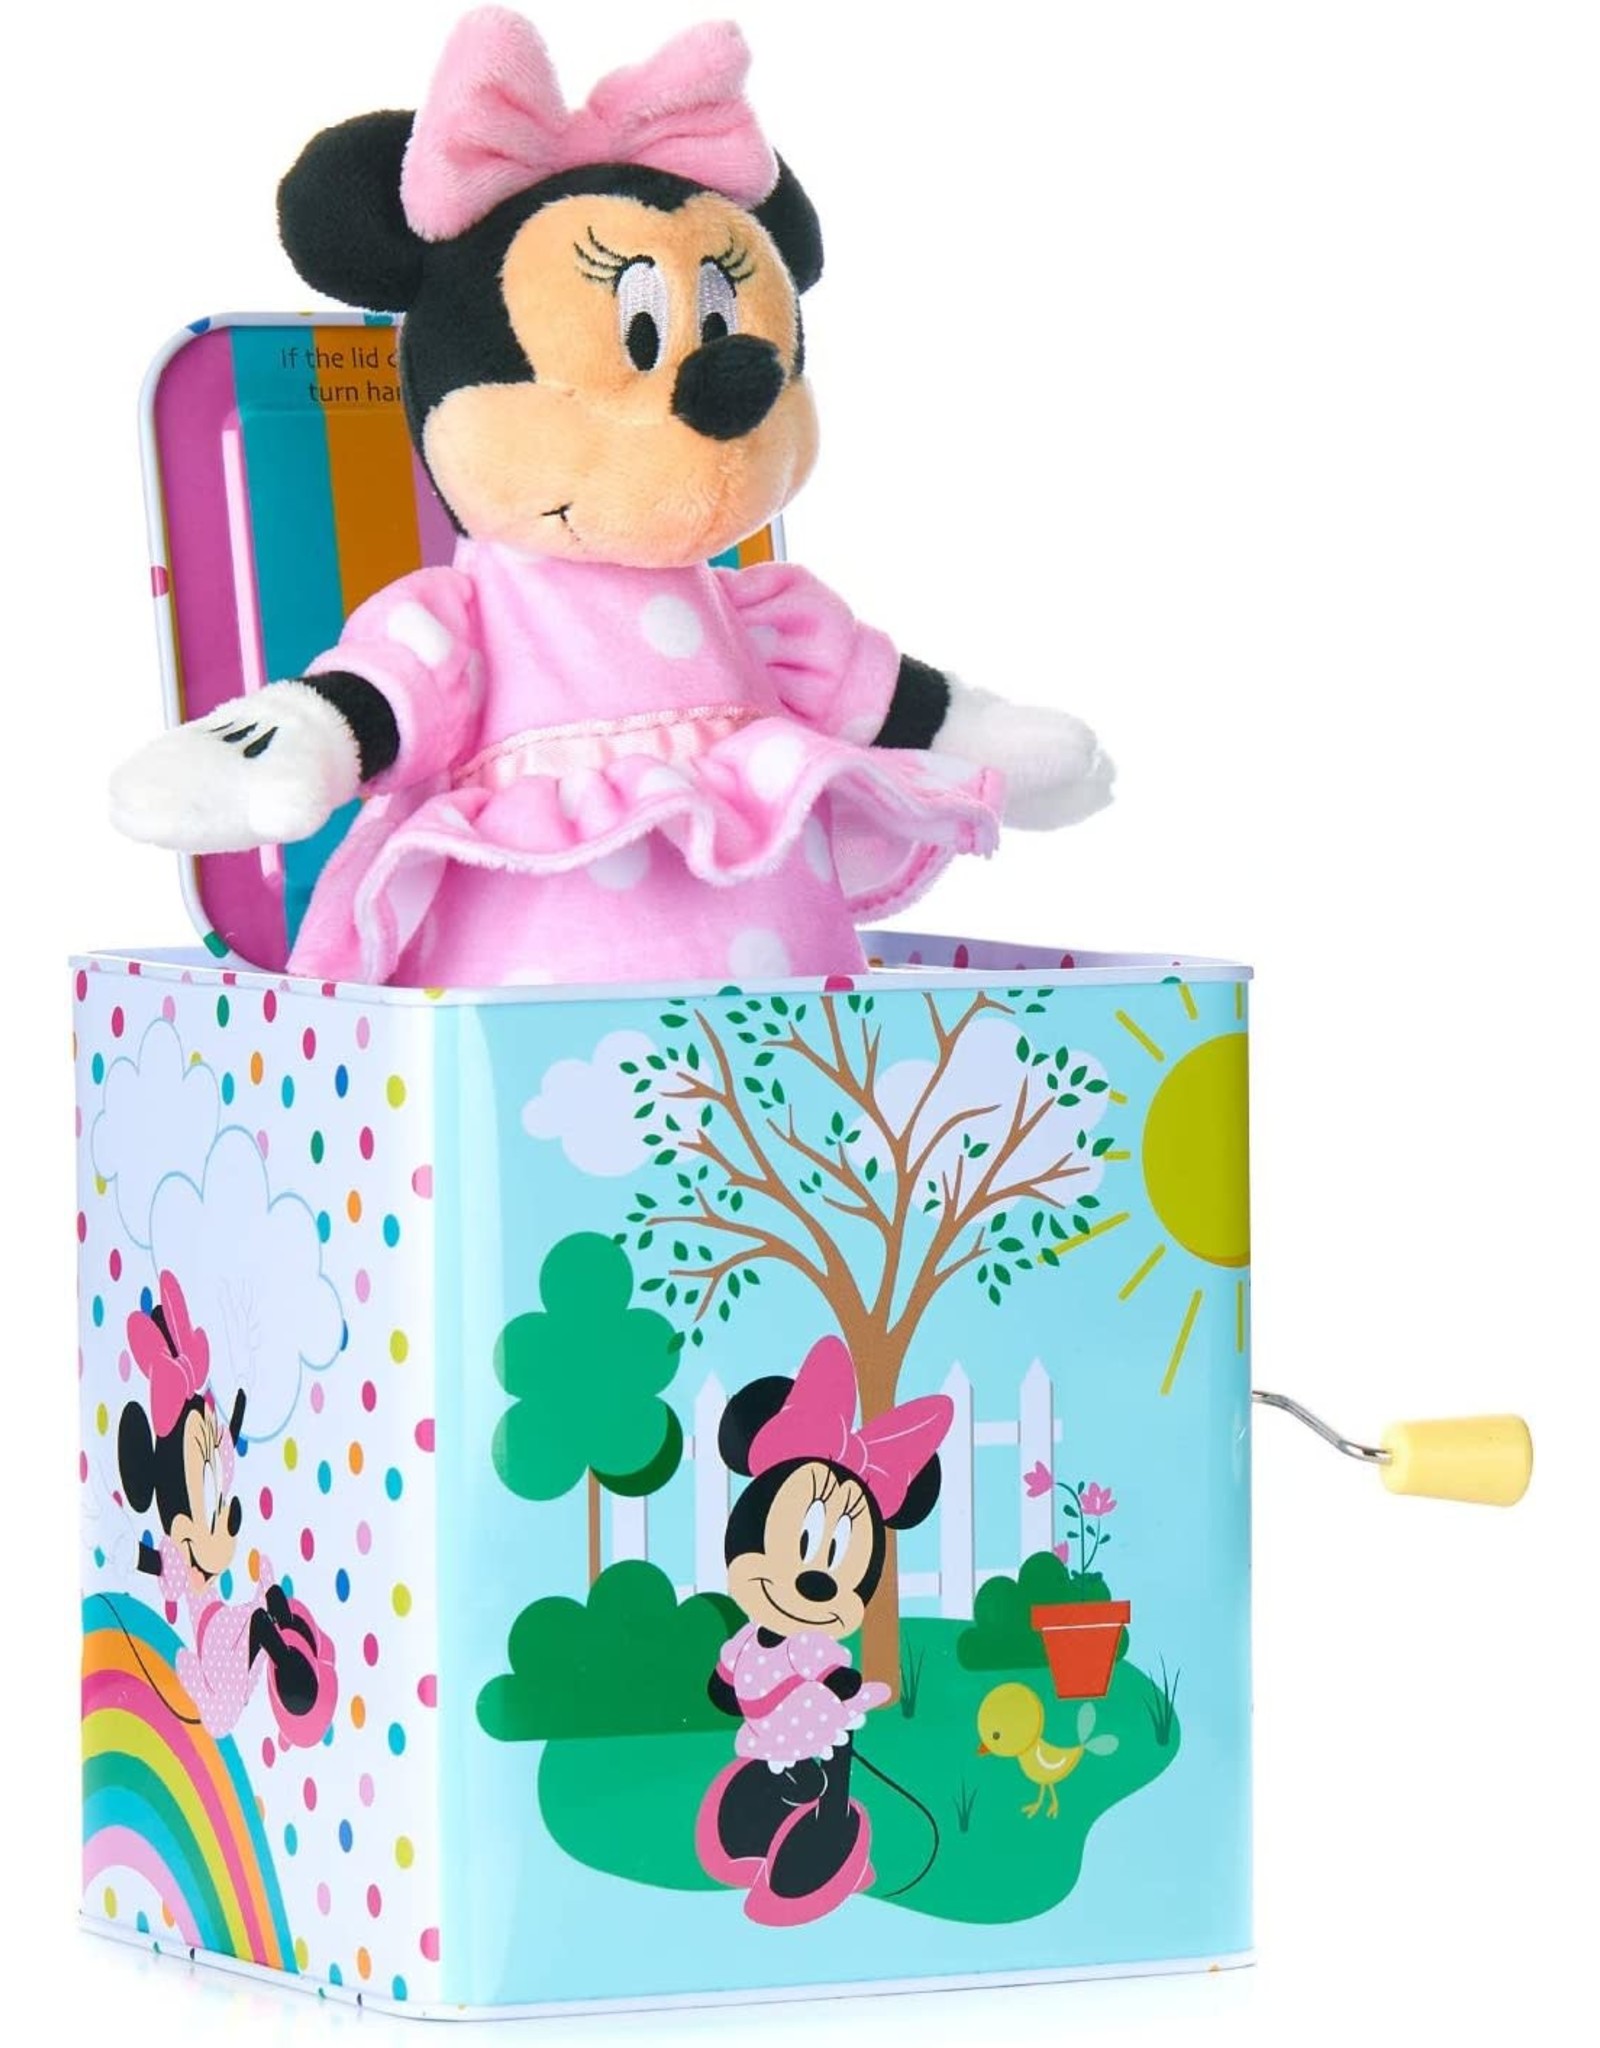 Disney Minnie Mouse Jack in the Box